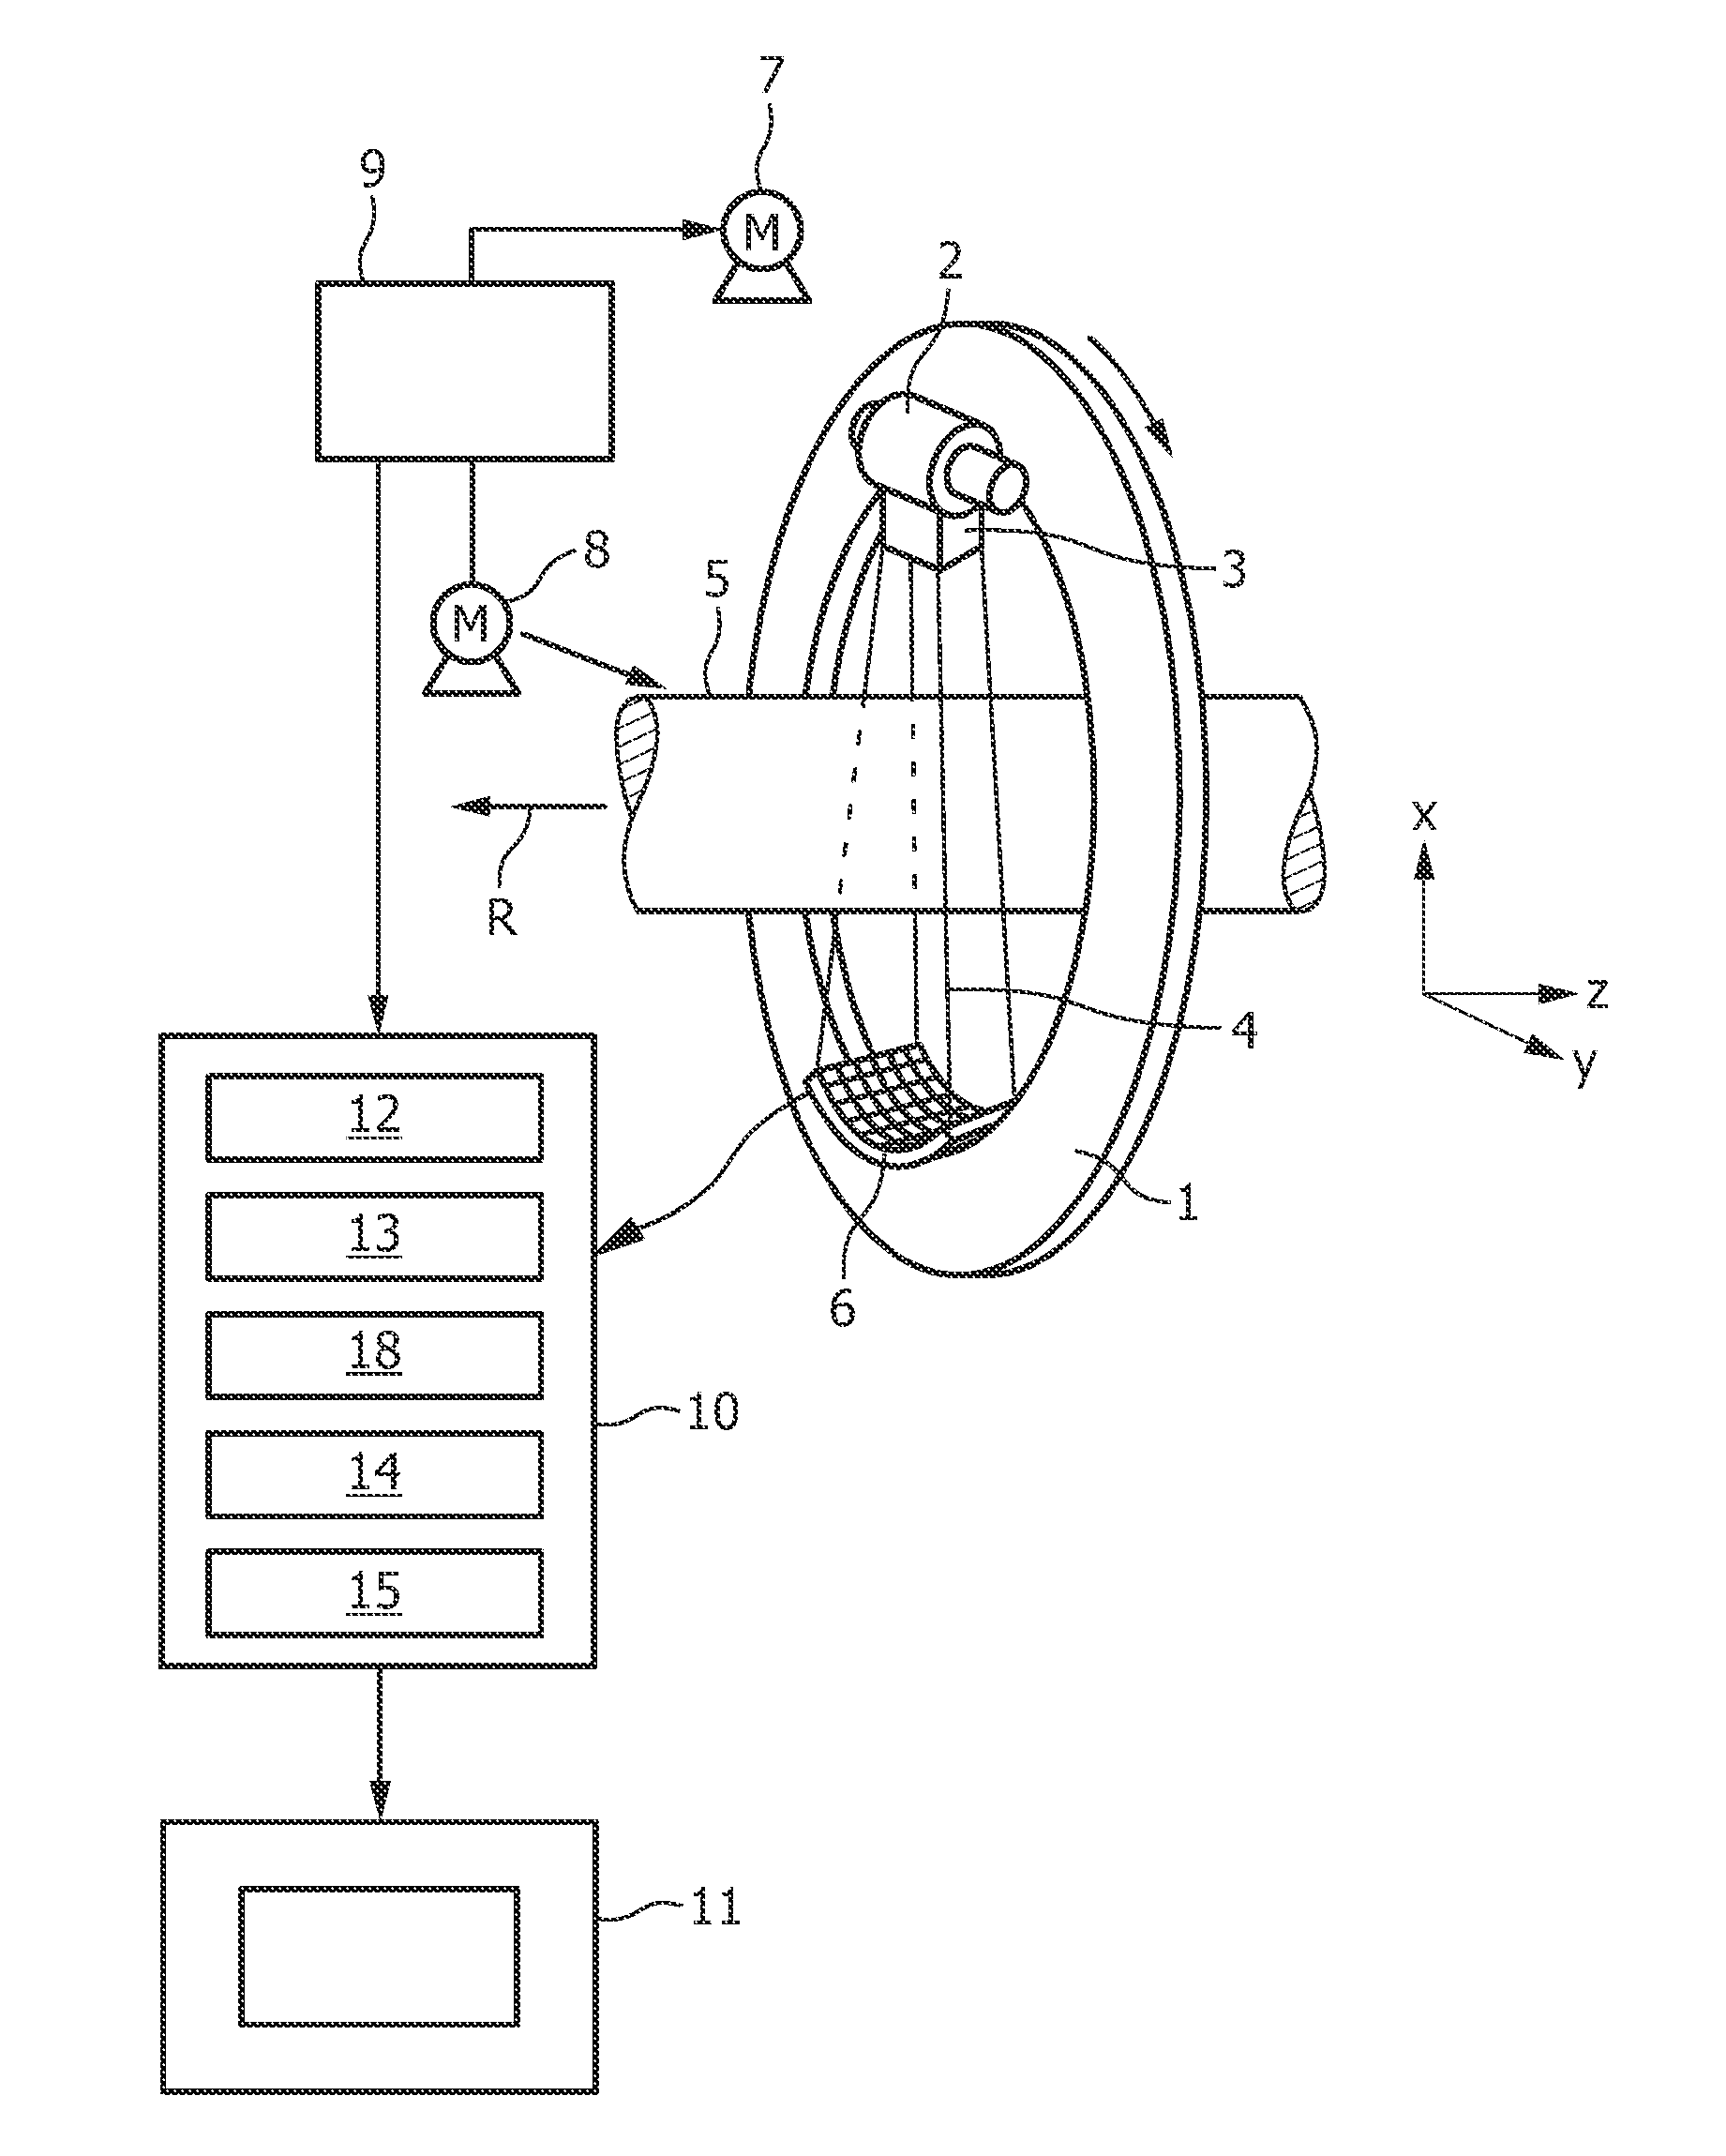 Apparatus for determining a high density region in an image